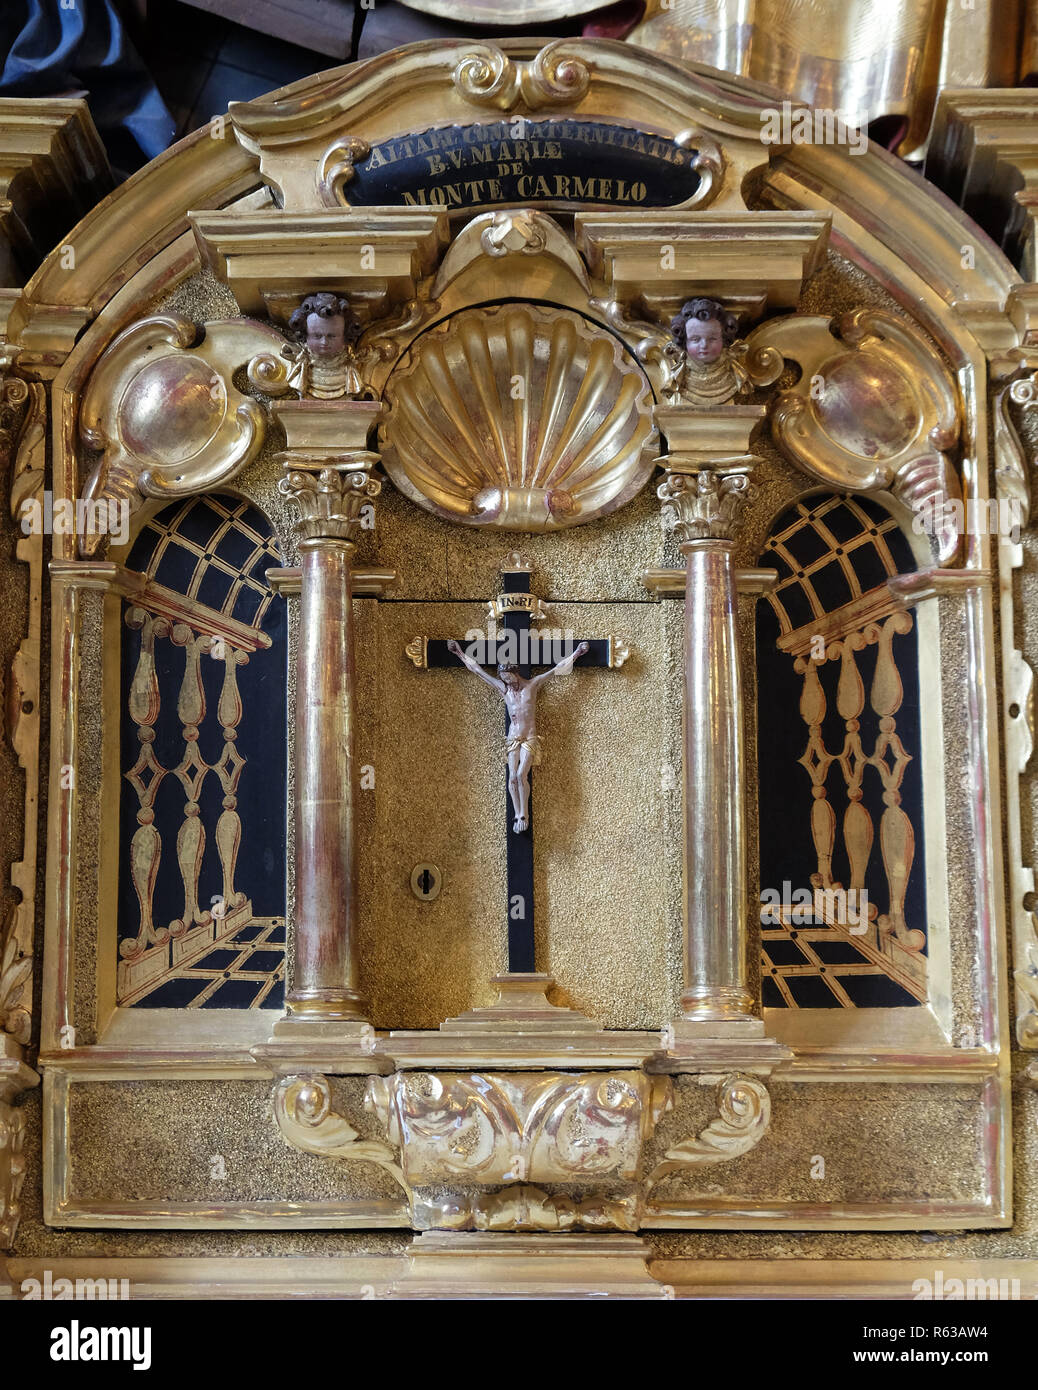 Tabernacle on the altar of Assumption in the church of St. Leodegar in Lucerne, Switzerland Stock Photo